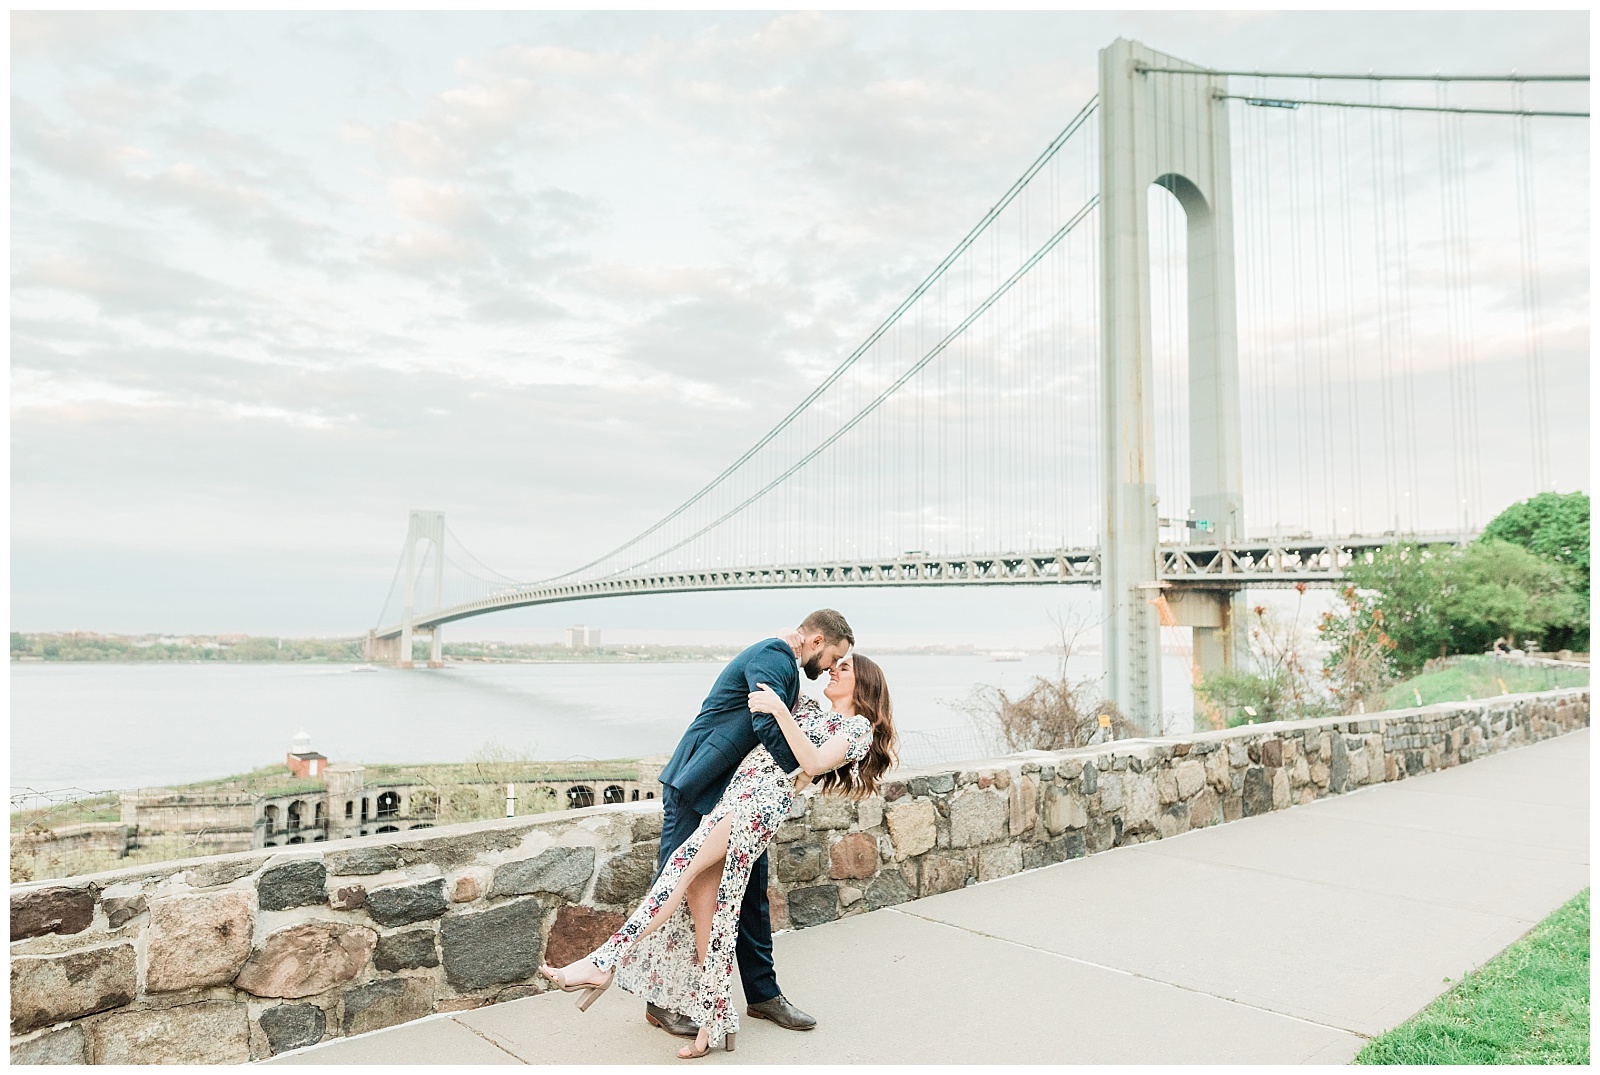 A man dips a woman back and kisses her in front of the Verrazzano Bridge.